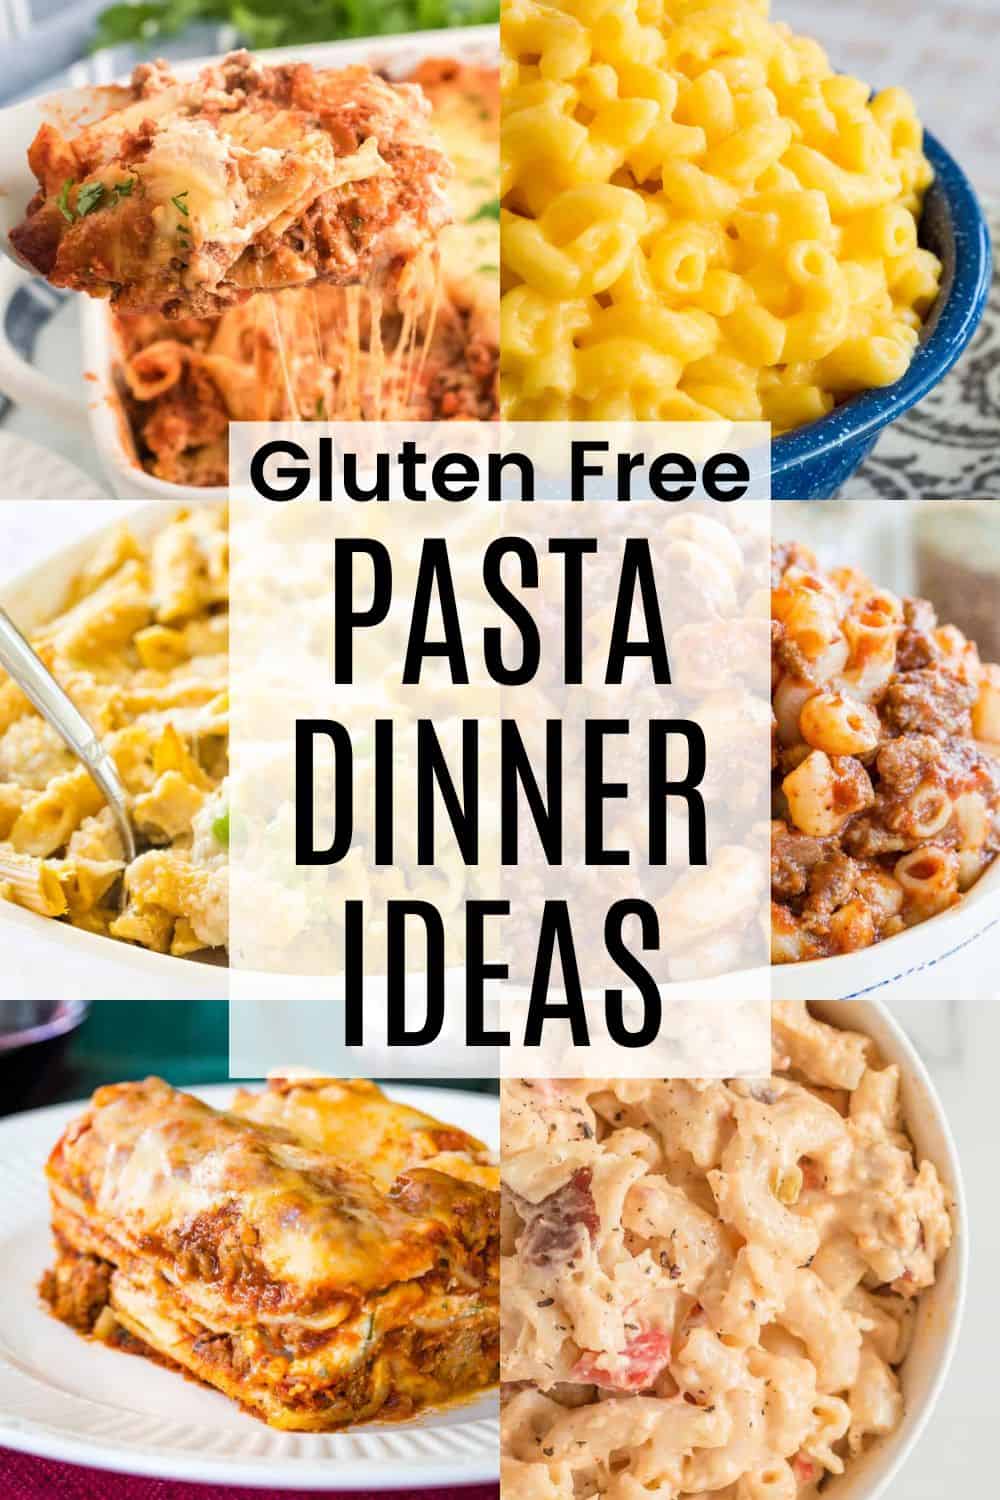 A two-by-three collage of pasta dishes like lasagna, beefaroni, baked ziti, and mac and cheese with a white box in the middle with black text overlay that says "Gluten Free Pasta Dinner Ideas".